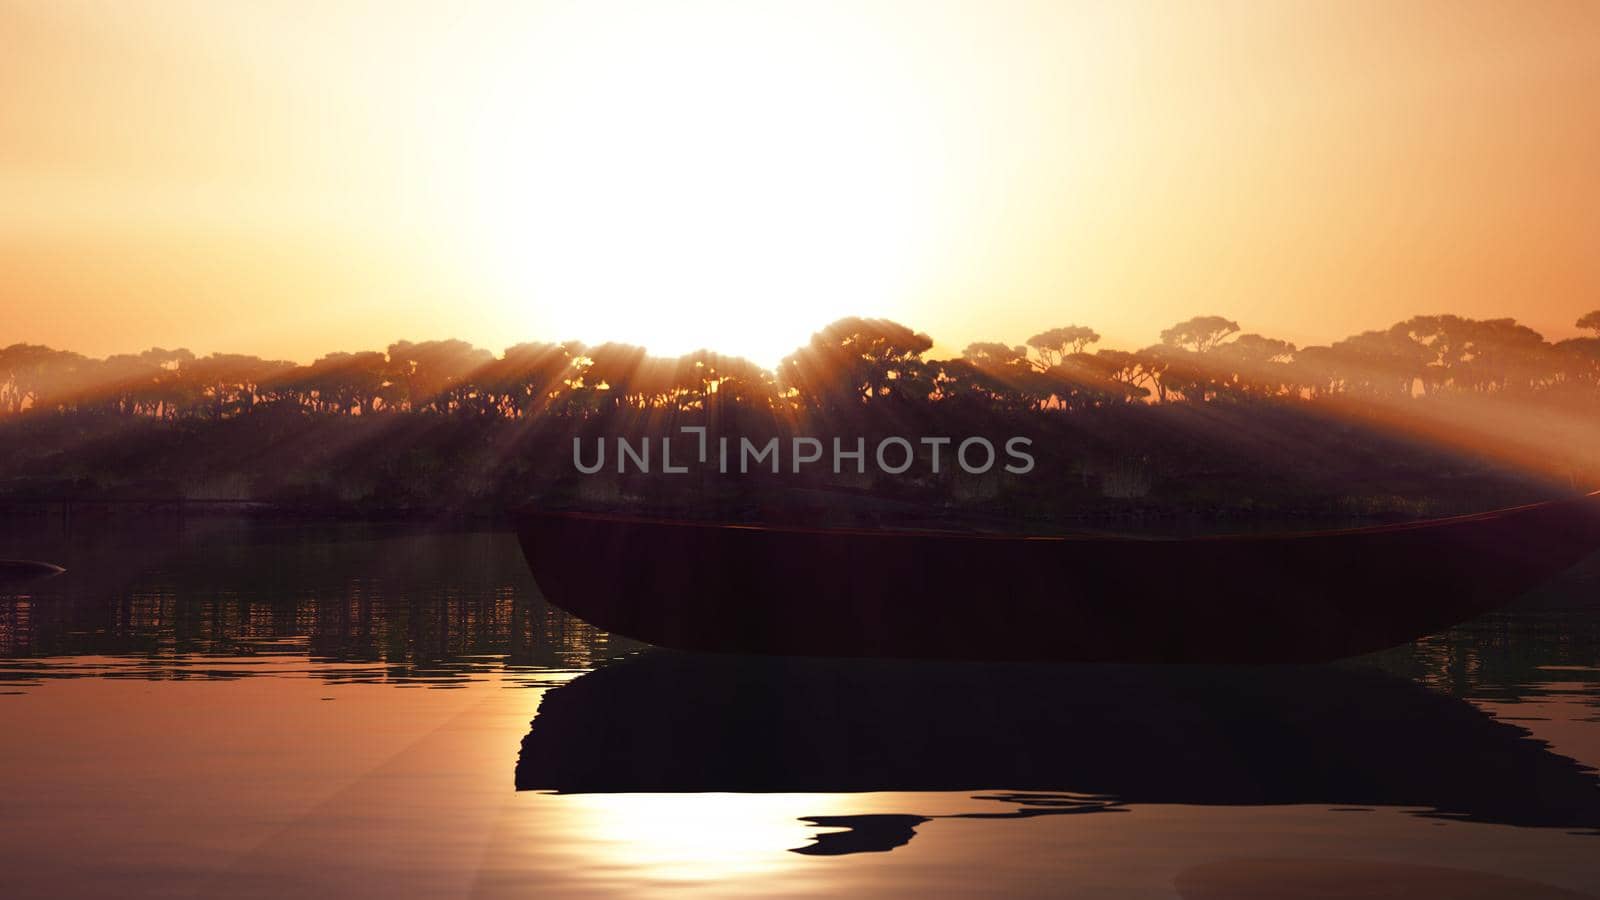 Beautiful sunset over the tropical lagoon, illustration 3d rendering